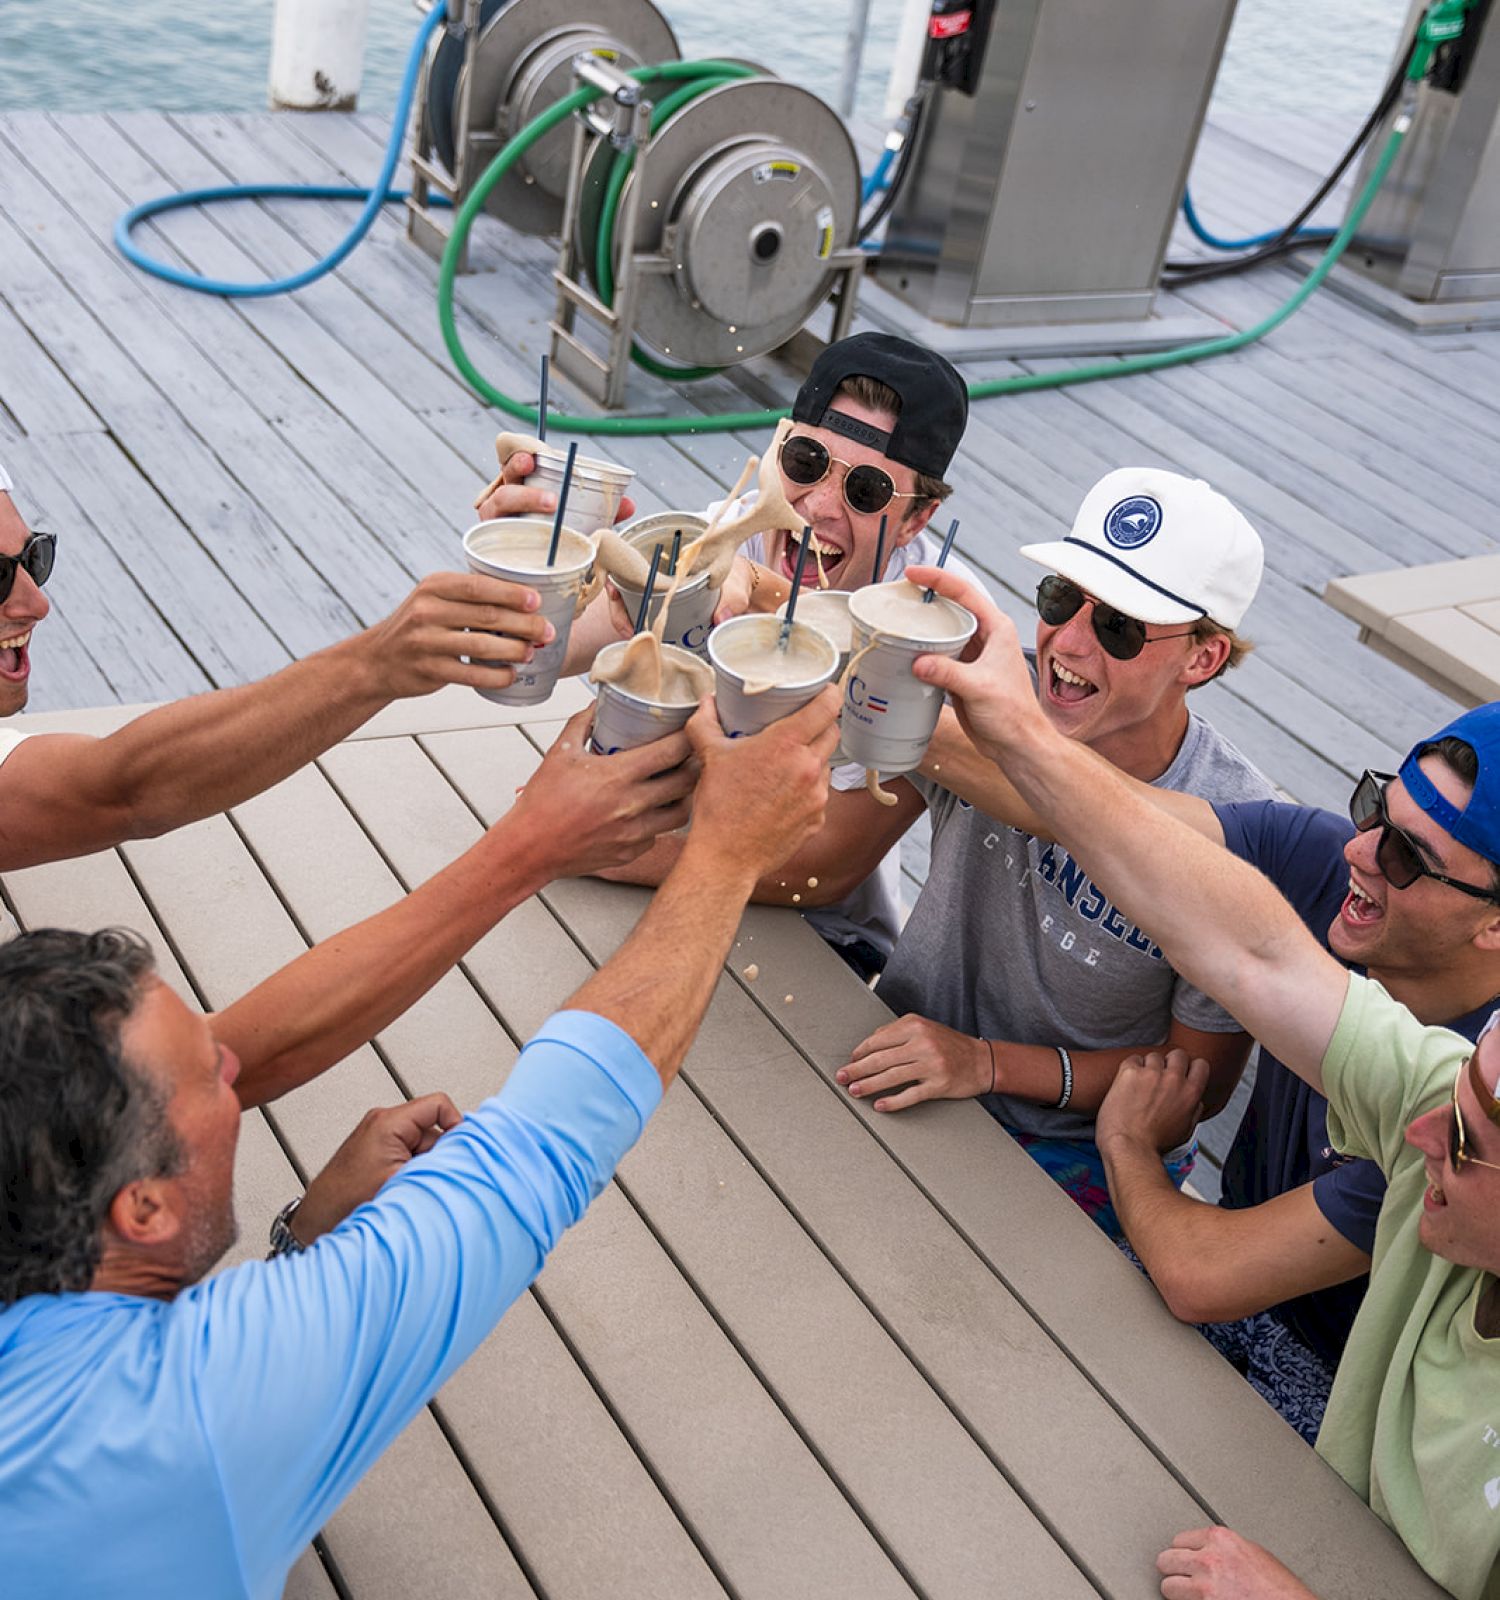 A group of people raising their drinks in a toast on a dock with fuel pumps and hoses in the background.